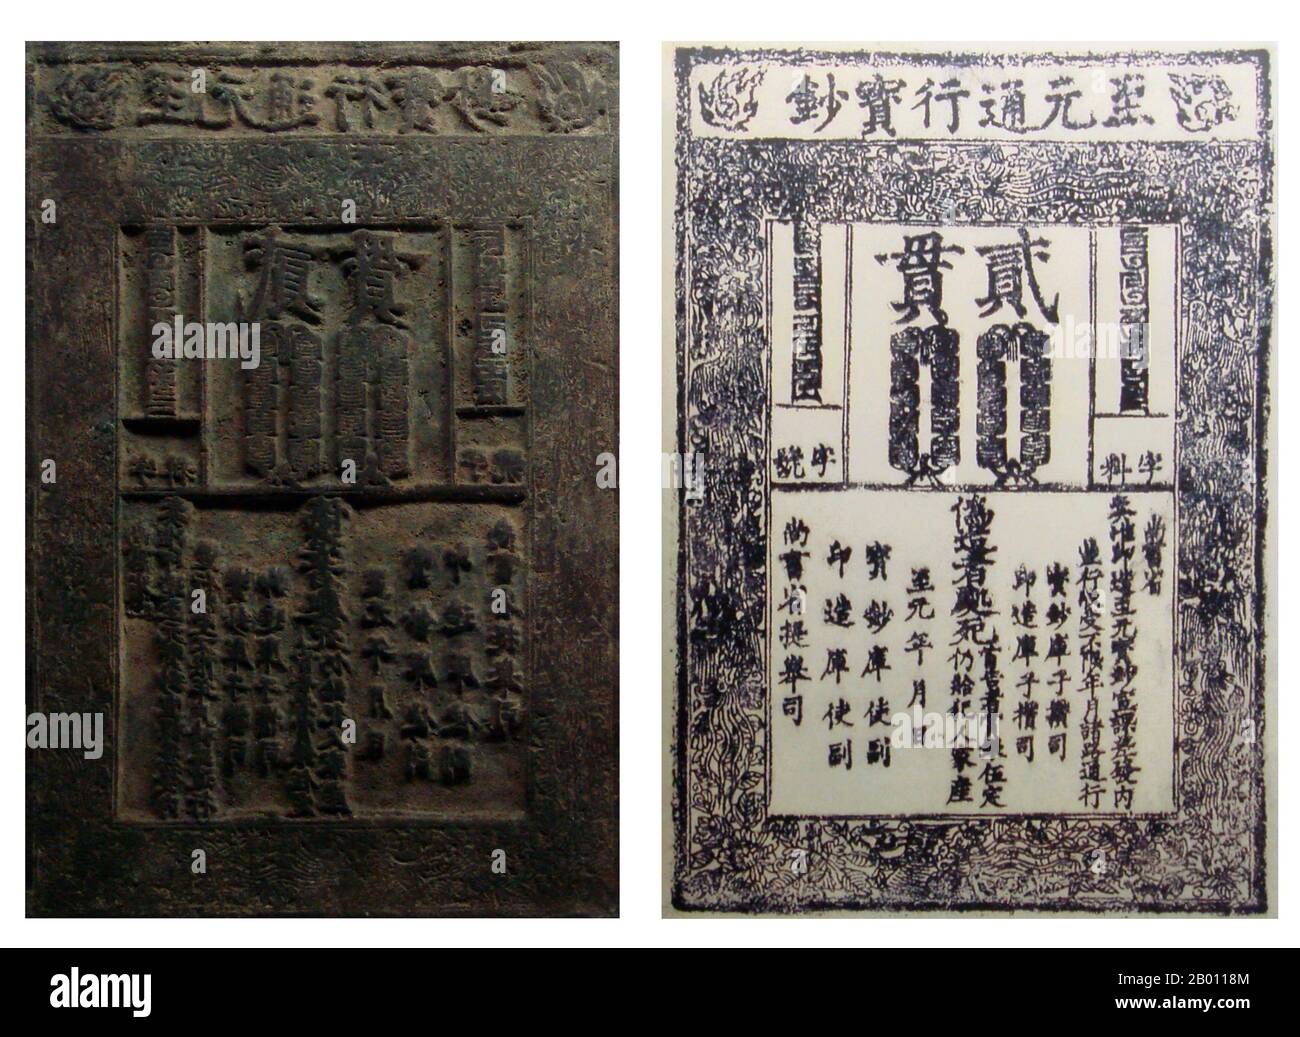 China/Mongolia: Yuan dynasty banknote with its printing plate, 1287. Photo by PHGCOM (CC BY-SA 3.0 License).  Yuan dynasty banknote with its printing plate, 1287, utilising Chinese characters and the phags-pa Tibetan script adapted from Tibetan for use with Mongolian on the orders of Kublai Khan, c. 1269. Stock Photo